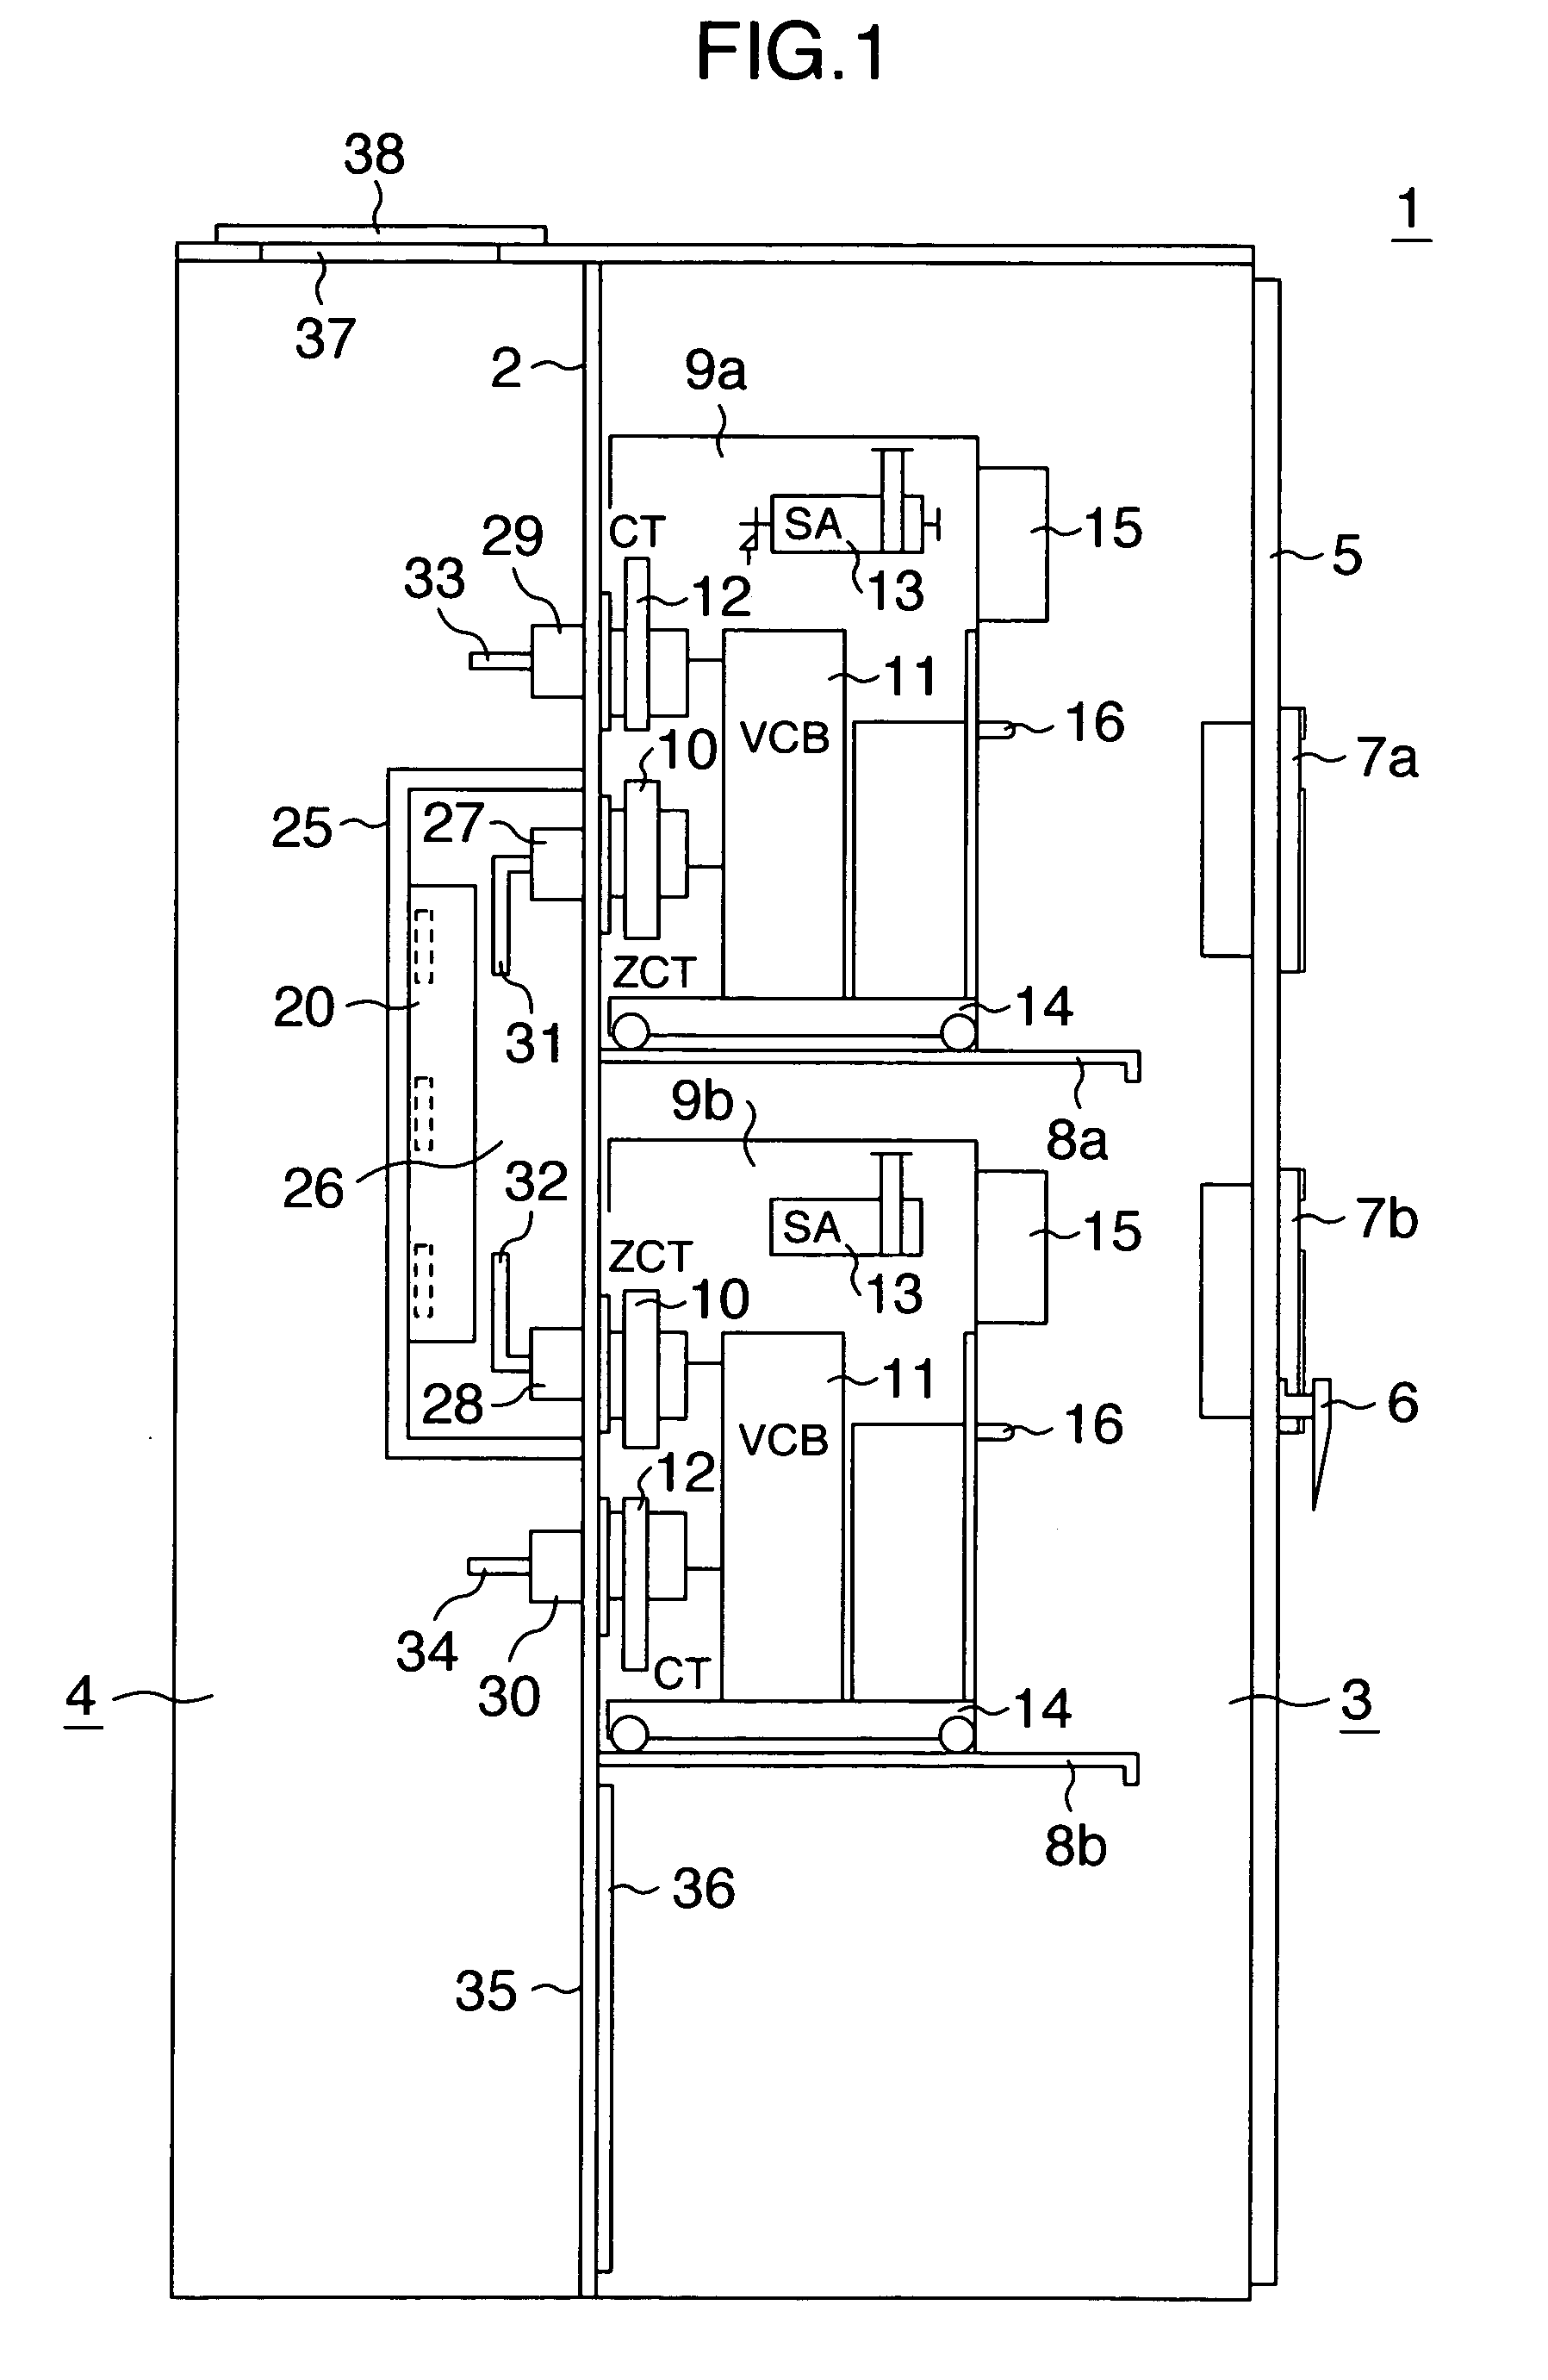 Switching device for power distribution